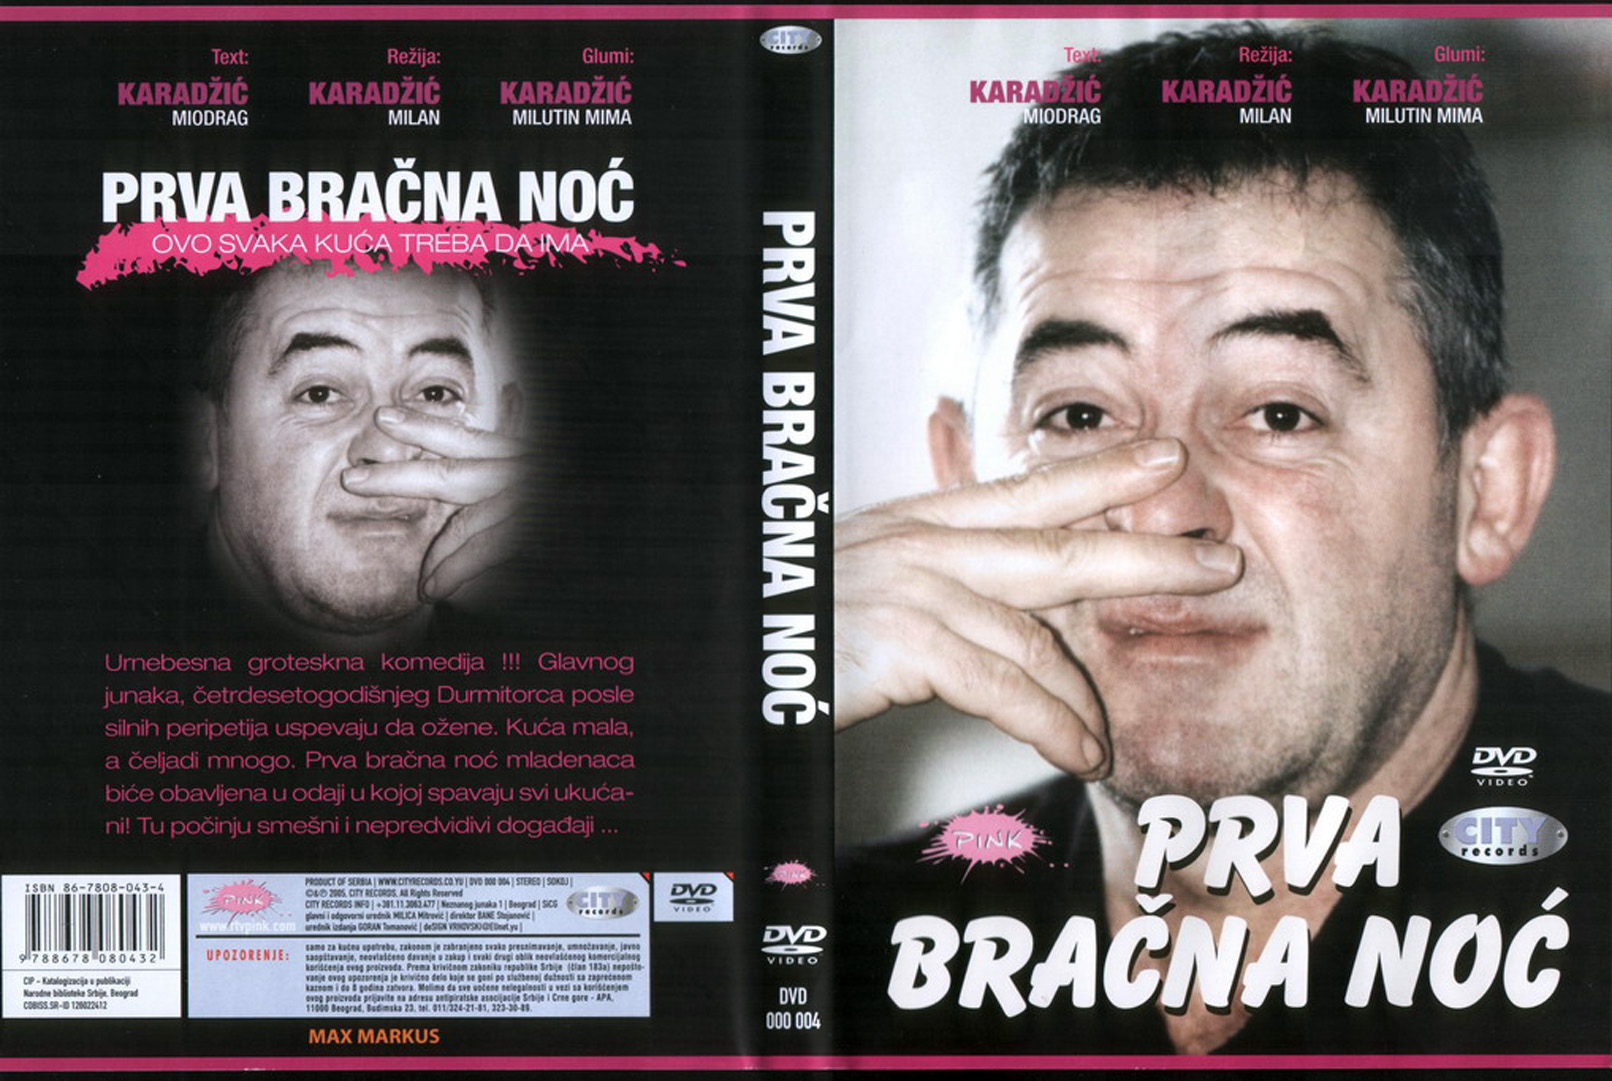 Click to view full size image -  DVD Cover - P - prva_bracna_noc_dvd - prva_bracna_noc_dvd.jpg